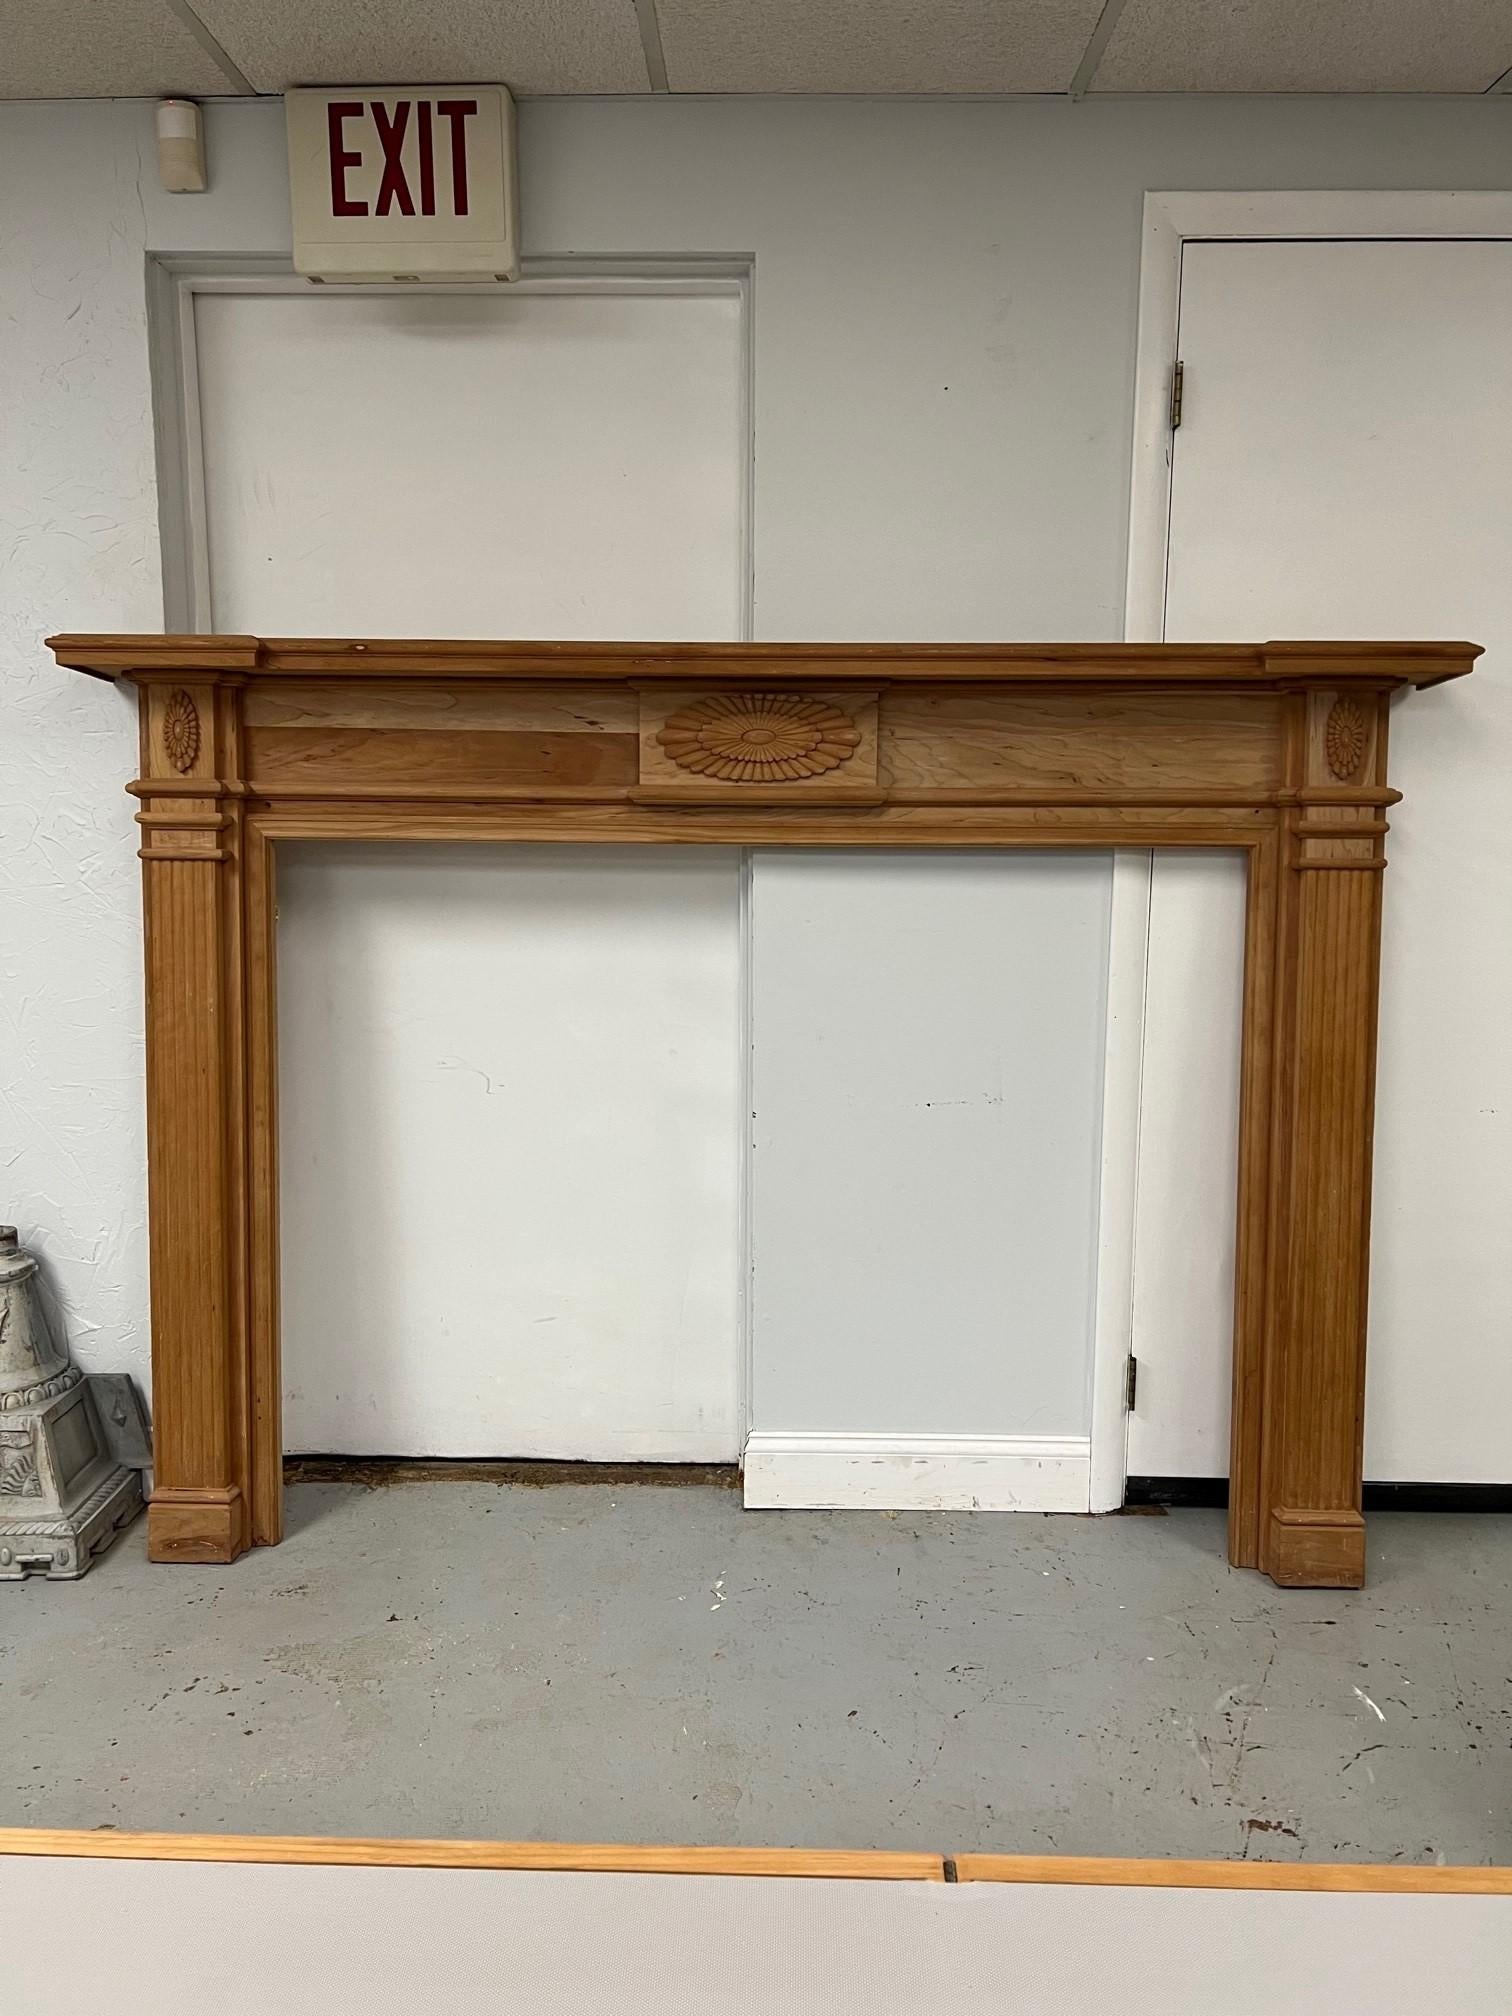 Very nice and simple solid cherry wood fireplace mantel with fluted legs and carved wood center. This was from a Brooklyn NY manufacture who closed. The mantel has never been installed and is a nice solid cherry which would look beautiful stained or